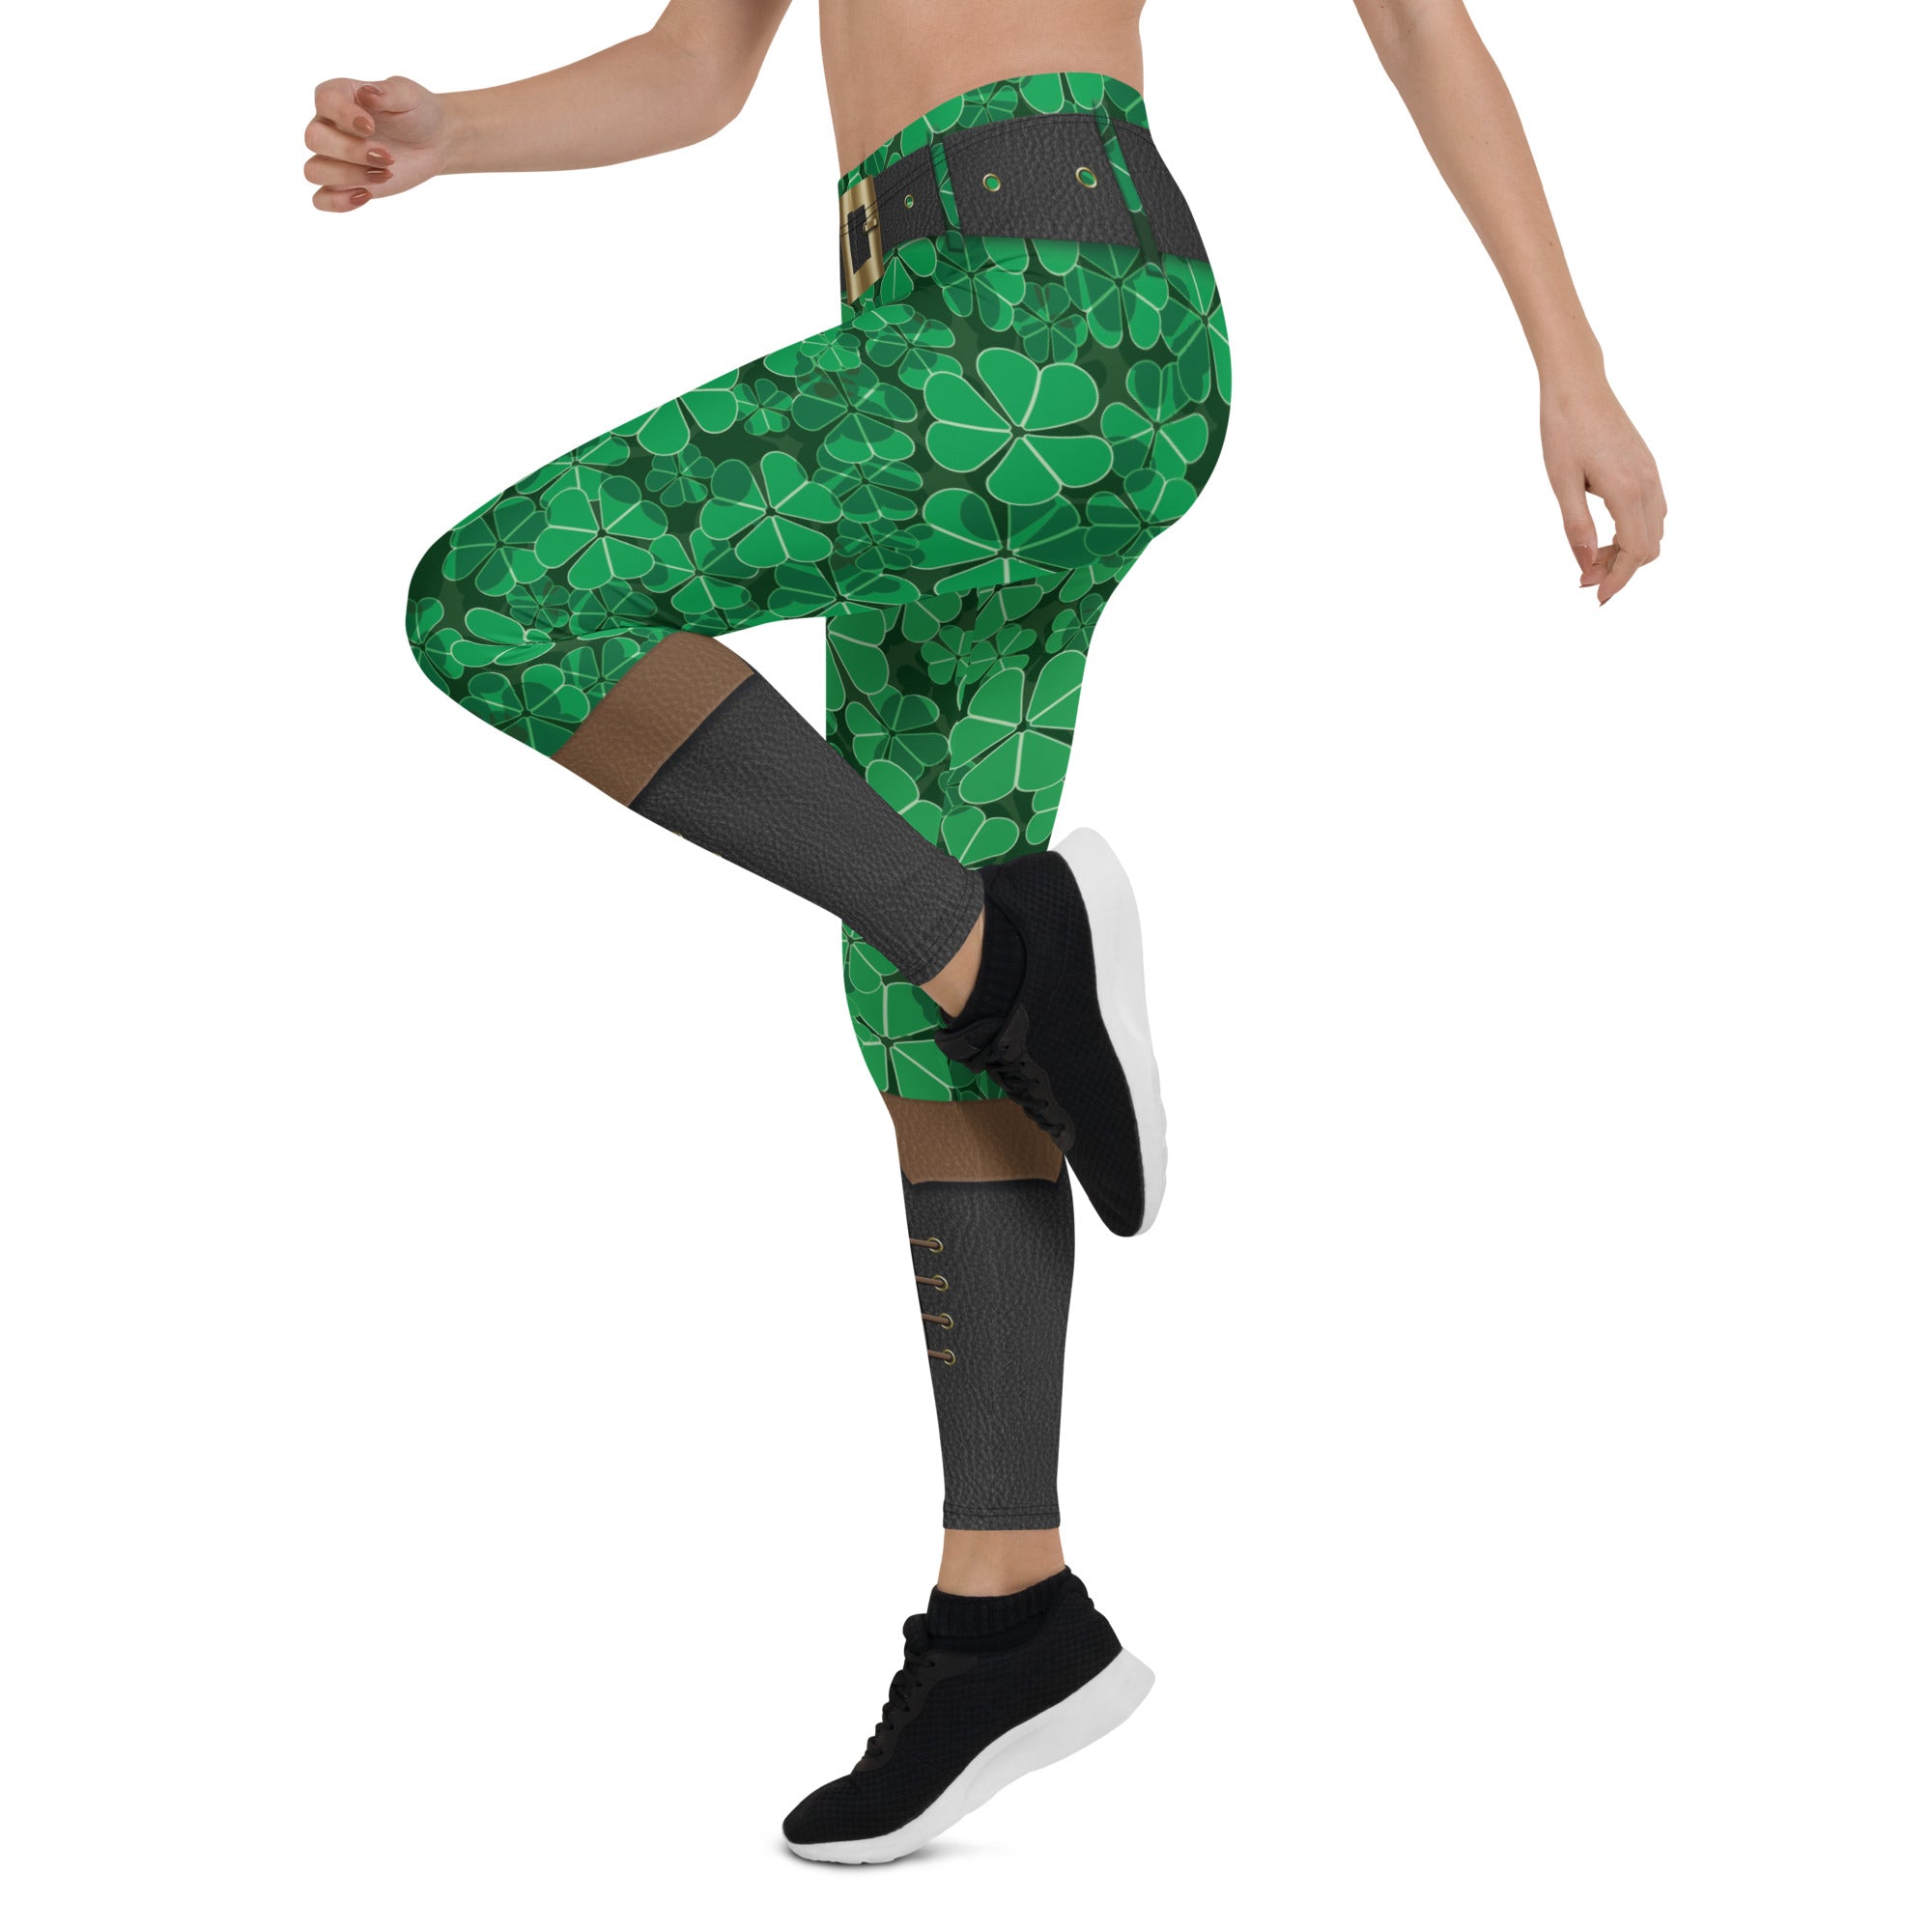 St. Patrick's Outfit Leggings